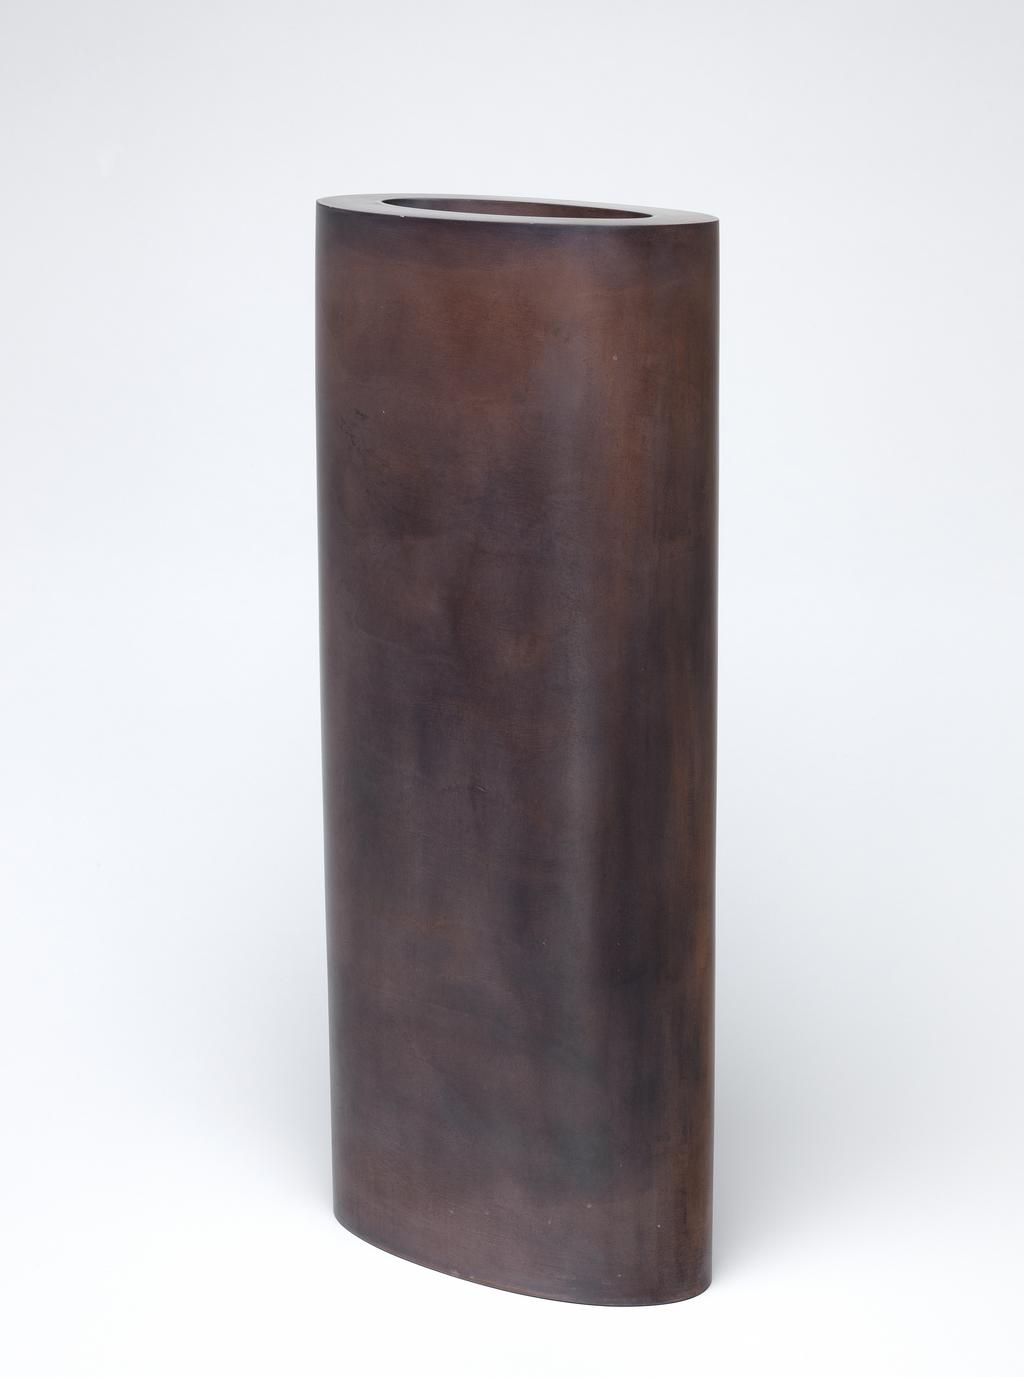 An image of Tall Ellipse in Deep Reds. Rena, Nicholas (British, b. 1963). Tall elliptical vessel with straight sides and thick walls. The upper rim is perfectly flat. The outside and much of the inside is burnished to an exceptionally smooth finish and stained red-brown; the stain is applied unevenly, giving an organic appearance. The underside is flat, burnished and stained. Earthenware, press moulded, sanded and burnished, stained, heigth 43 cm, width 19.4 cm, depth 10 cm, c. 2000. Acquisition Credit: Given by Nicholas and Judith Goodison through The Art Fund.